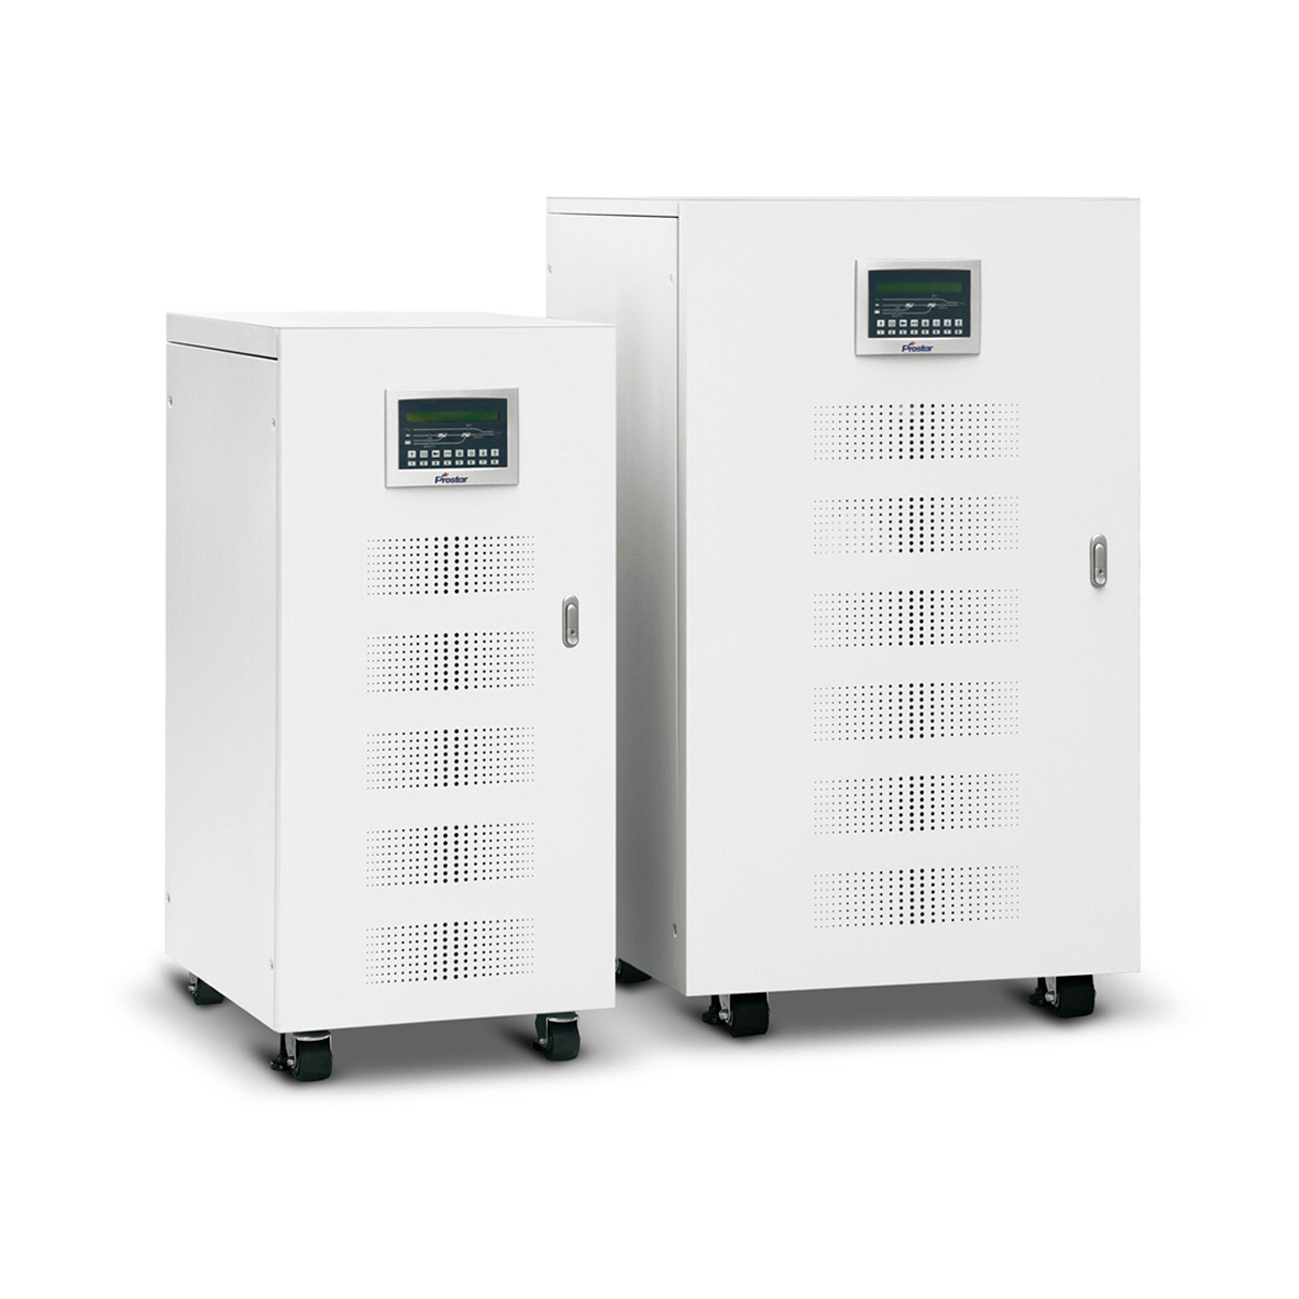 8-100KVA Low Frequency Online UPS (3:1)